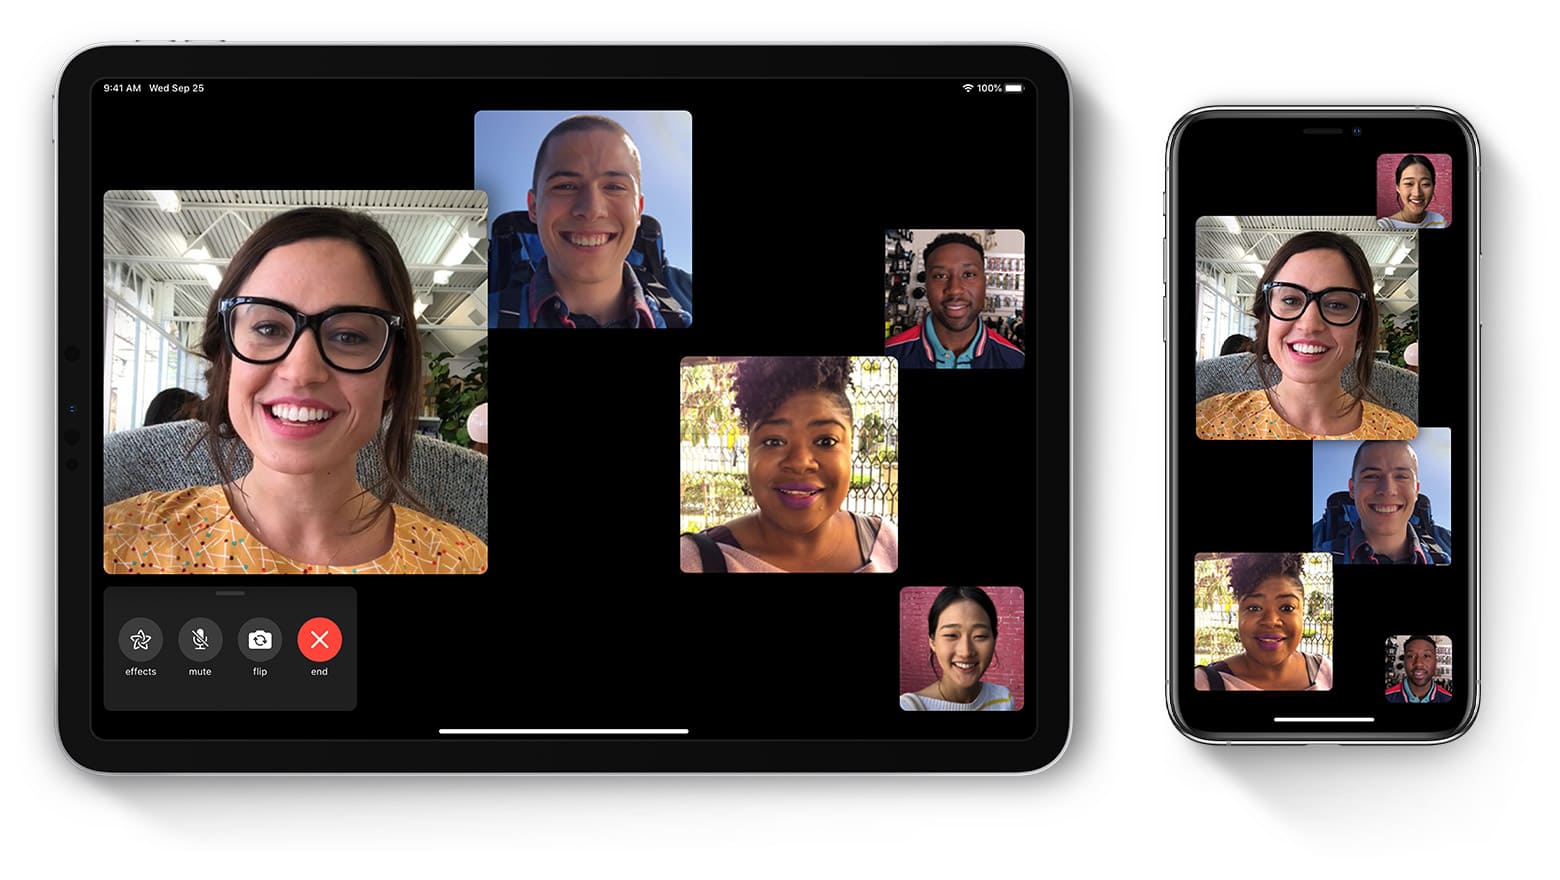 How to make a Group FaceTime call on iPhone, iPad or Mac